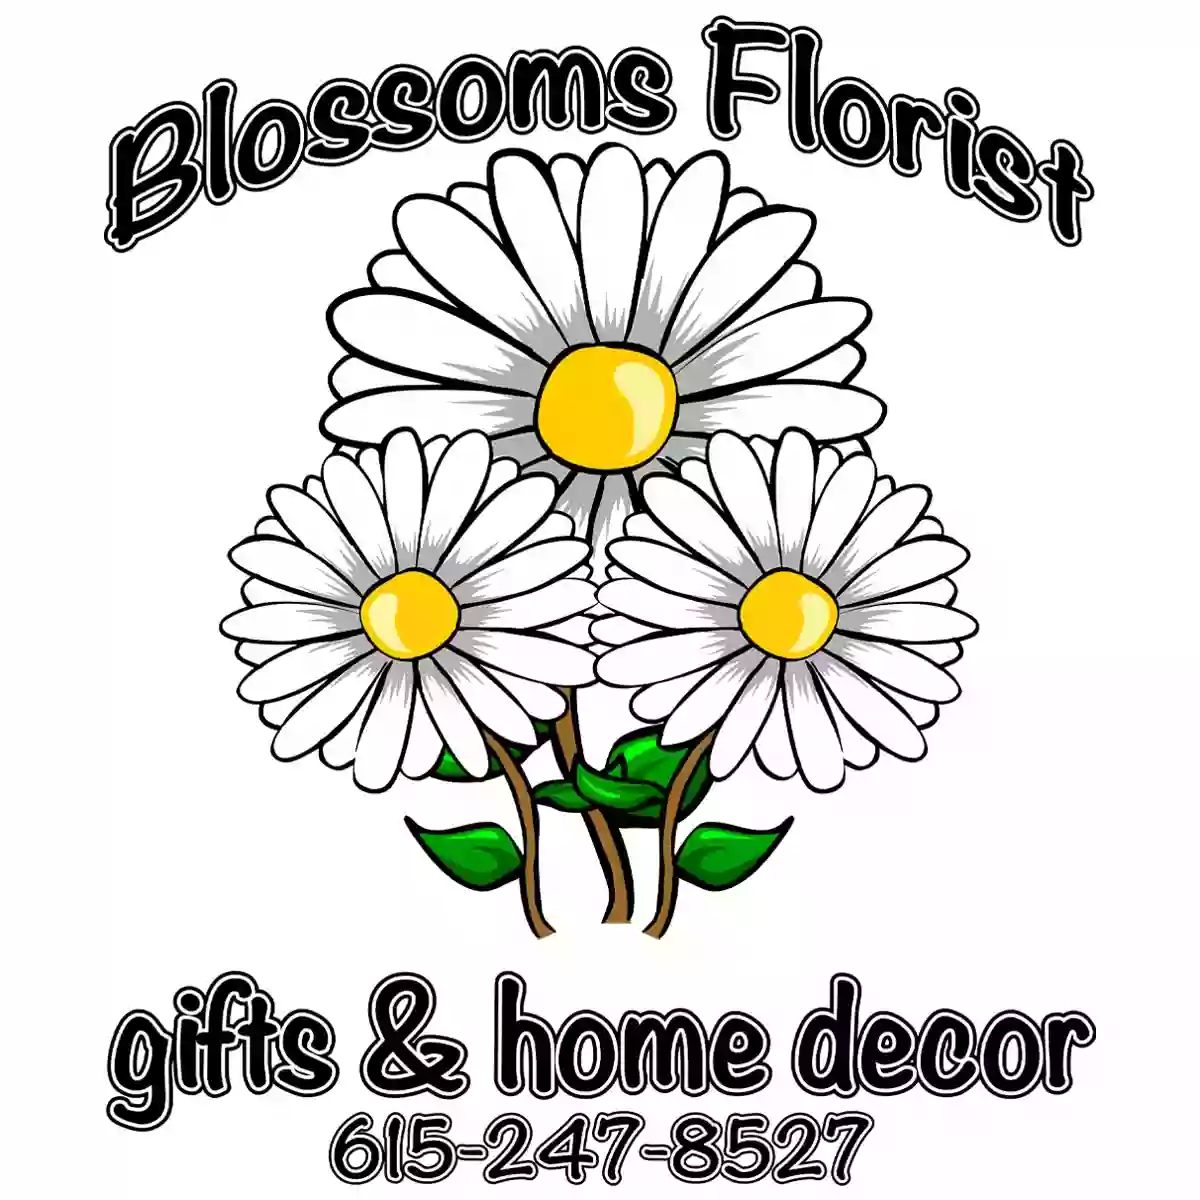 Blossoms Florist Gifts & Home Decor-Pleasant View